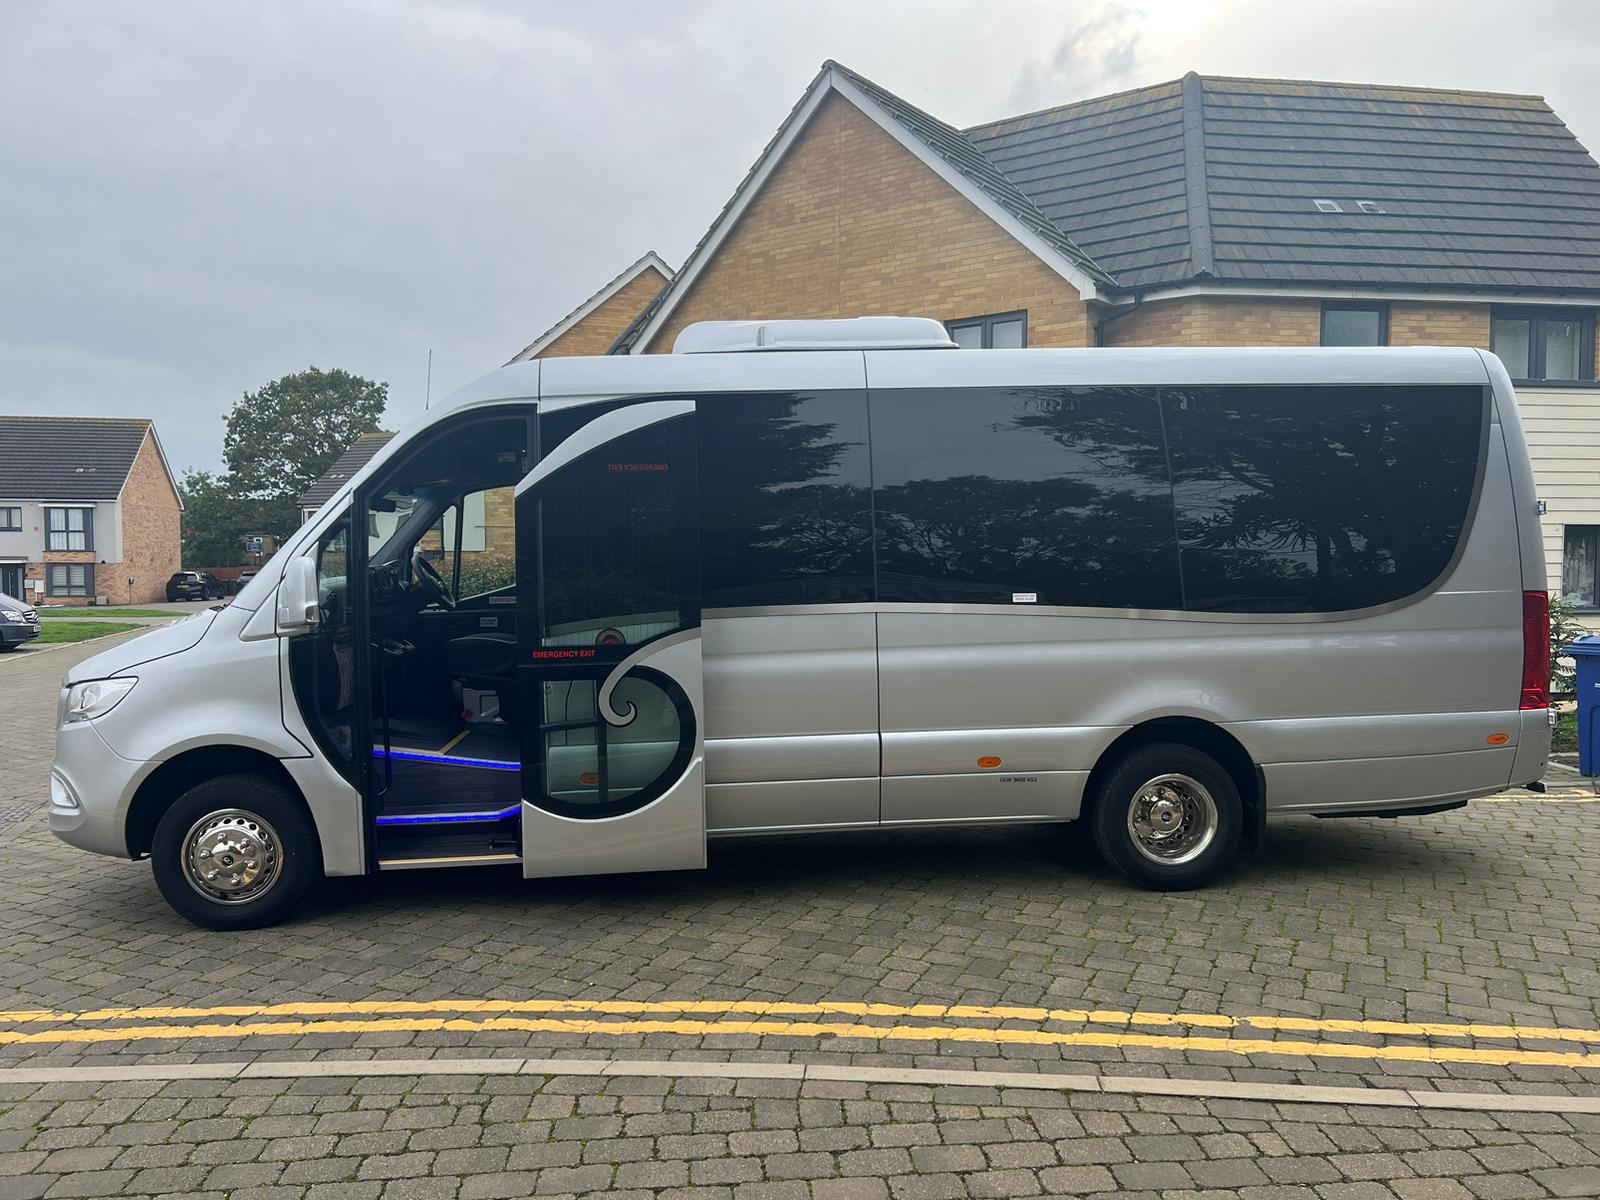 What to Look for When Hiring a Minibus in the UK